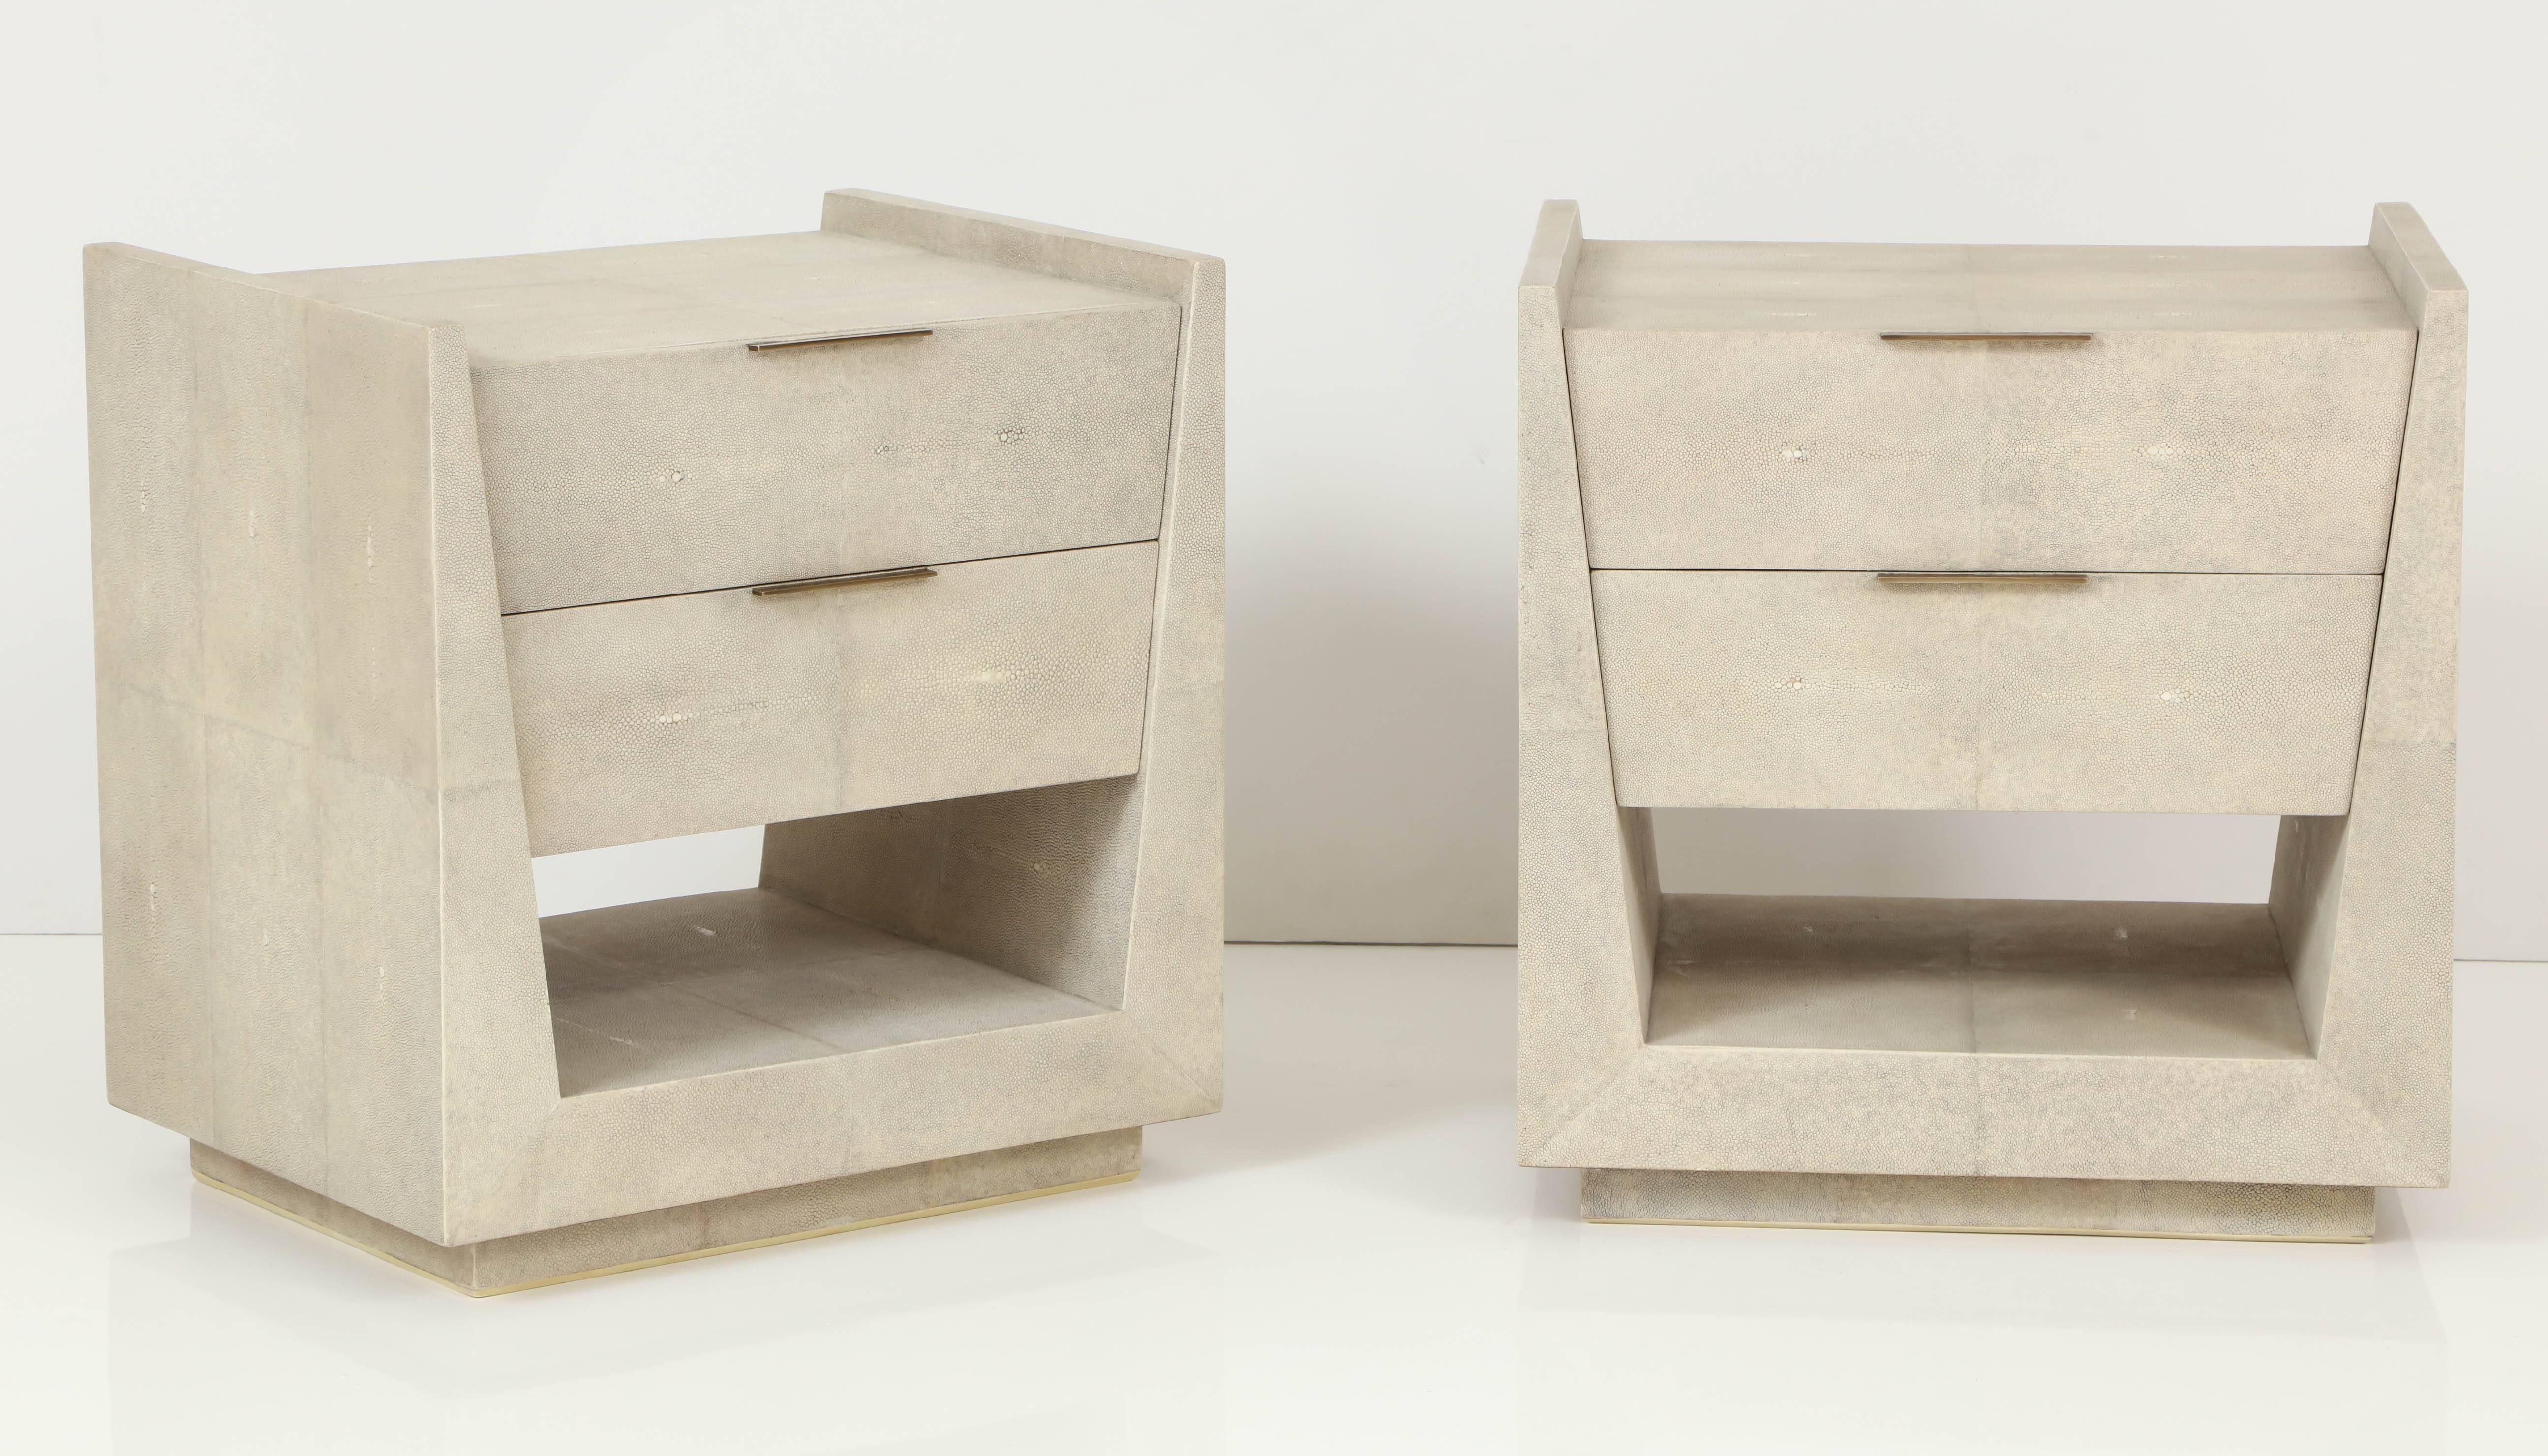 Pair of beautifully designed cream shagreen side tables or nightstands with brass handles, designed in France. Production time is 15-16 weeks plus delivery.